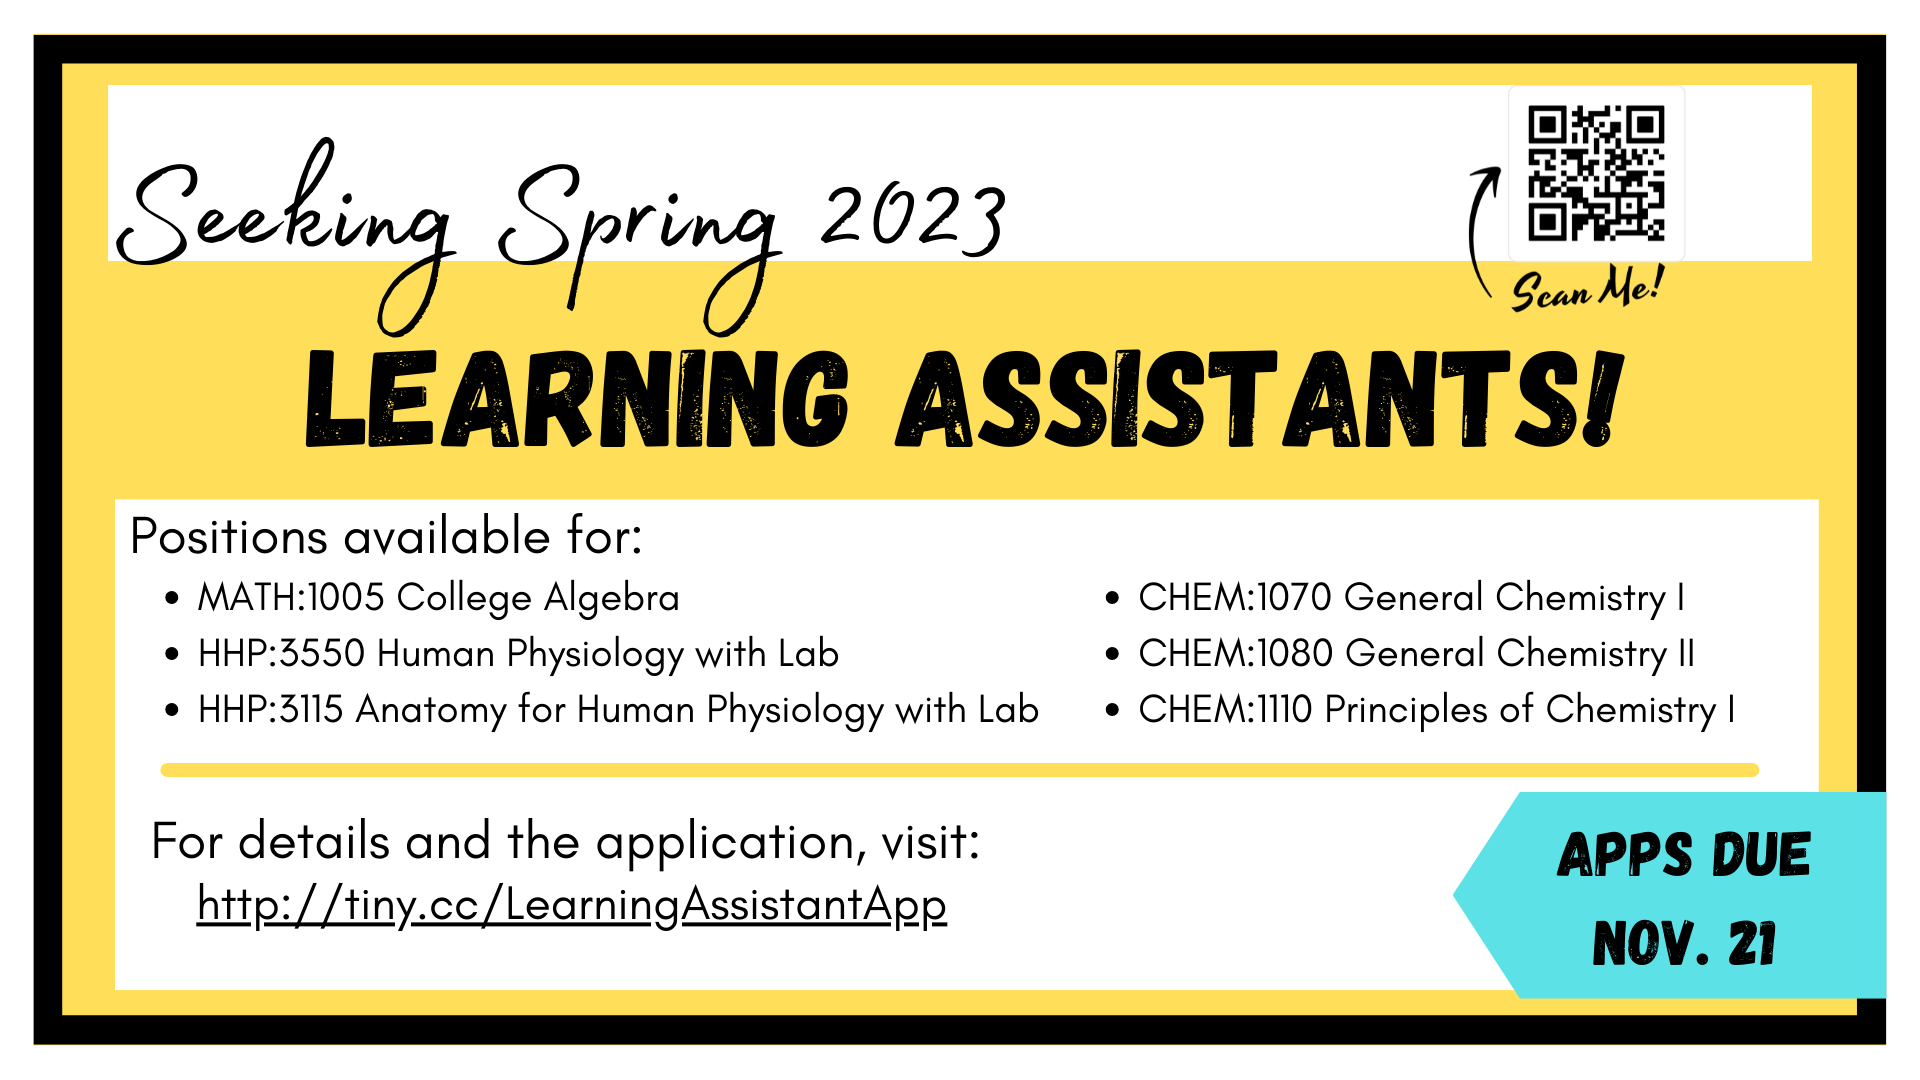 Seeking Spring 2023 Learning Assistants! For details and the application, visit http://tiny.cc/learningassisstantapp